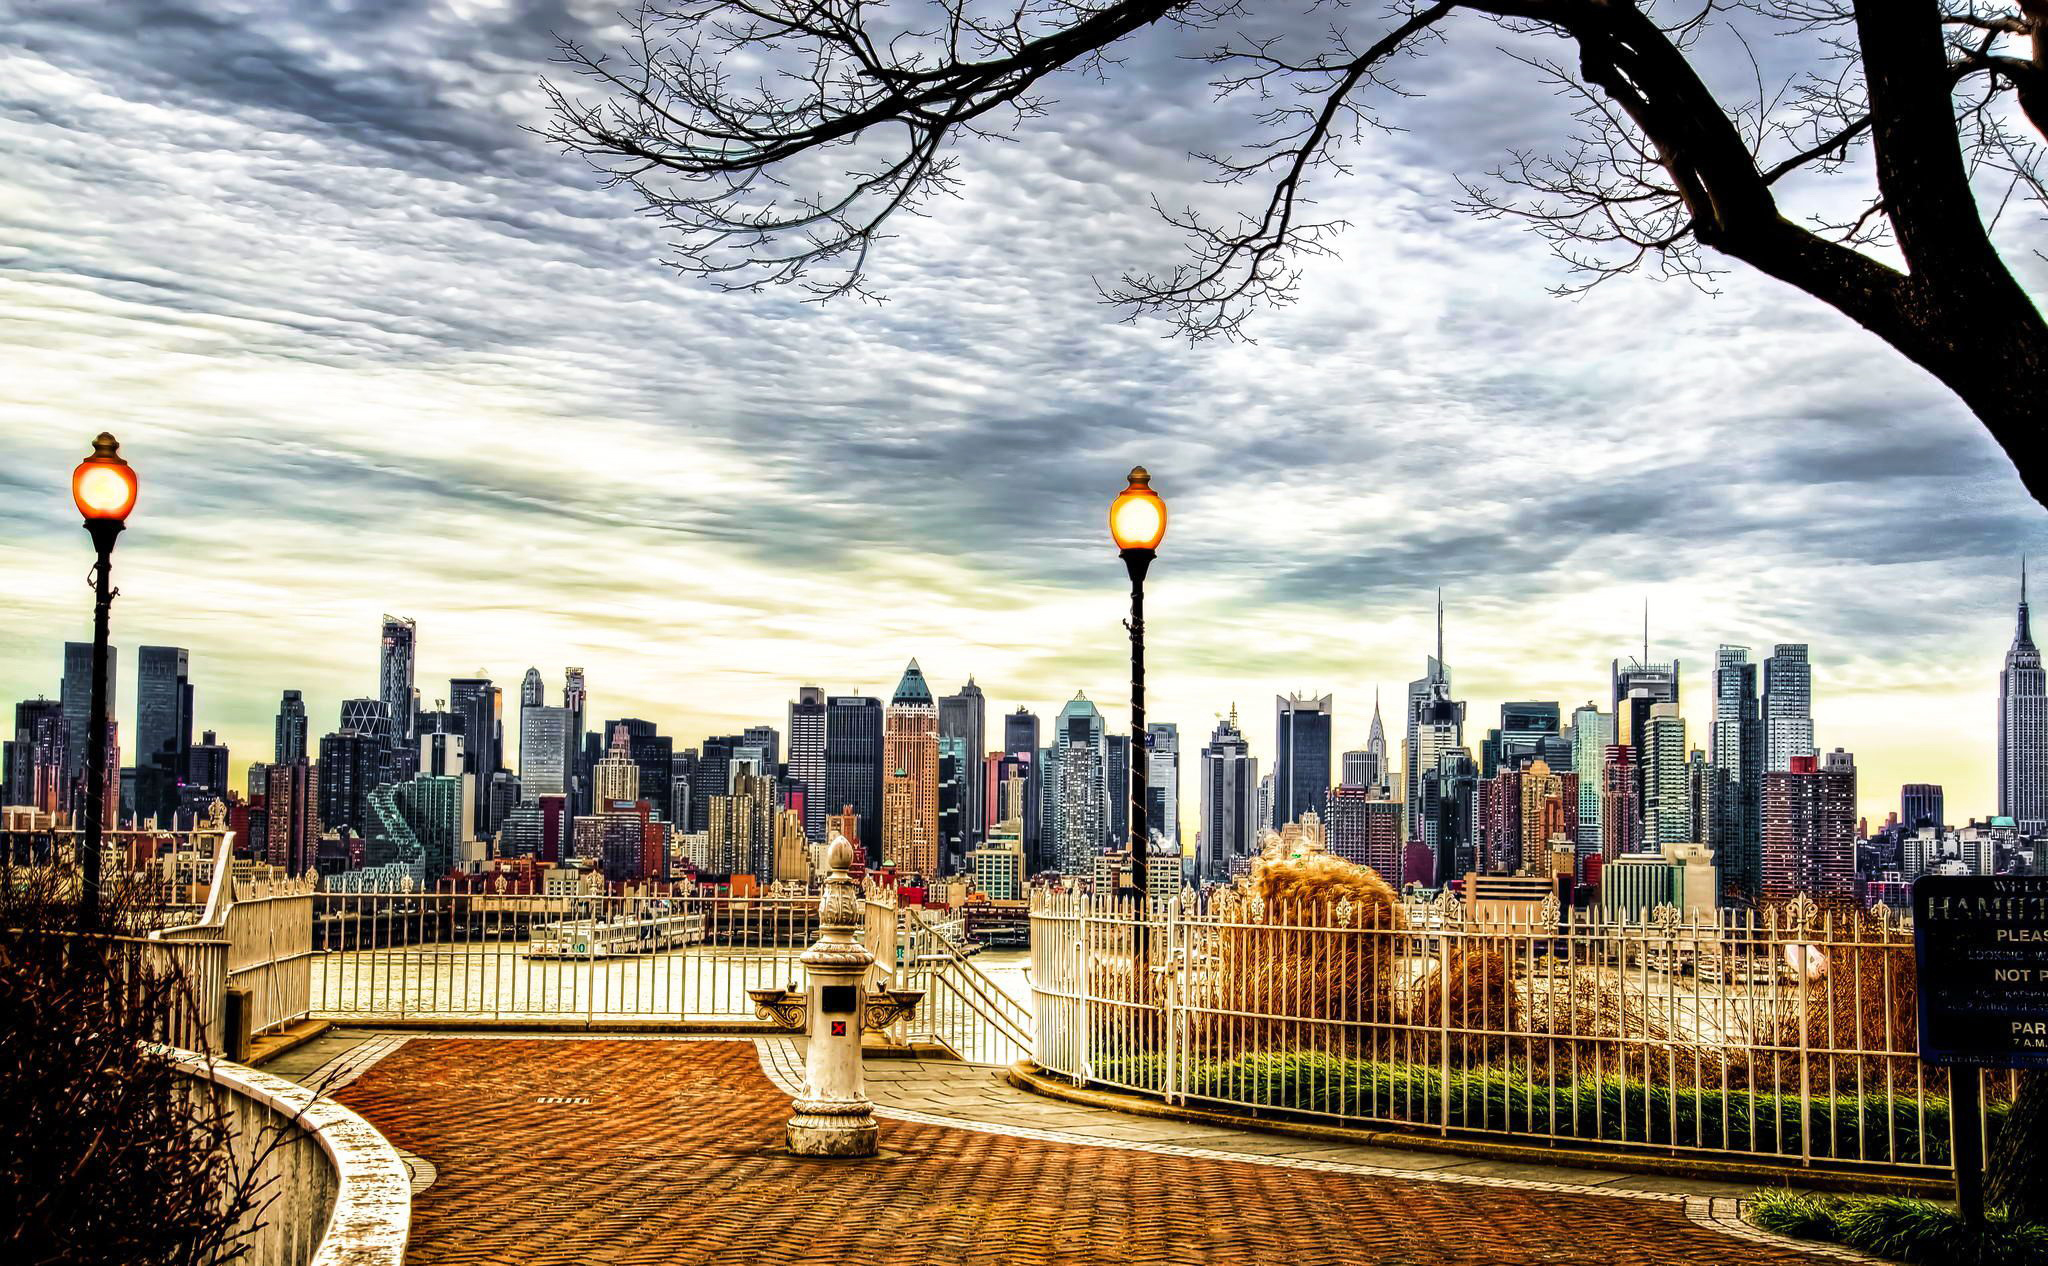 Hd desktop cities city building park street new york man made download free picture